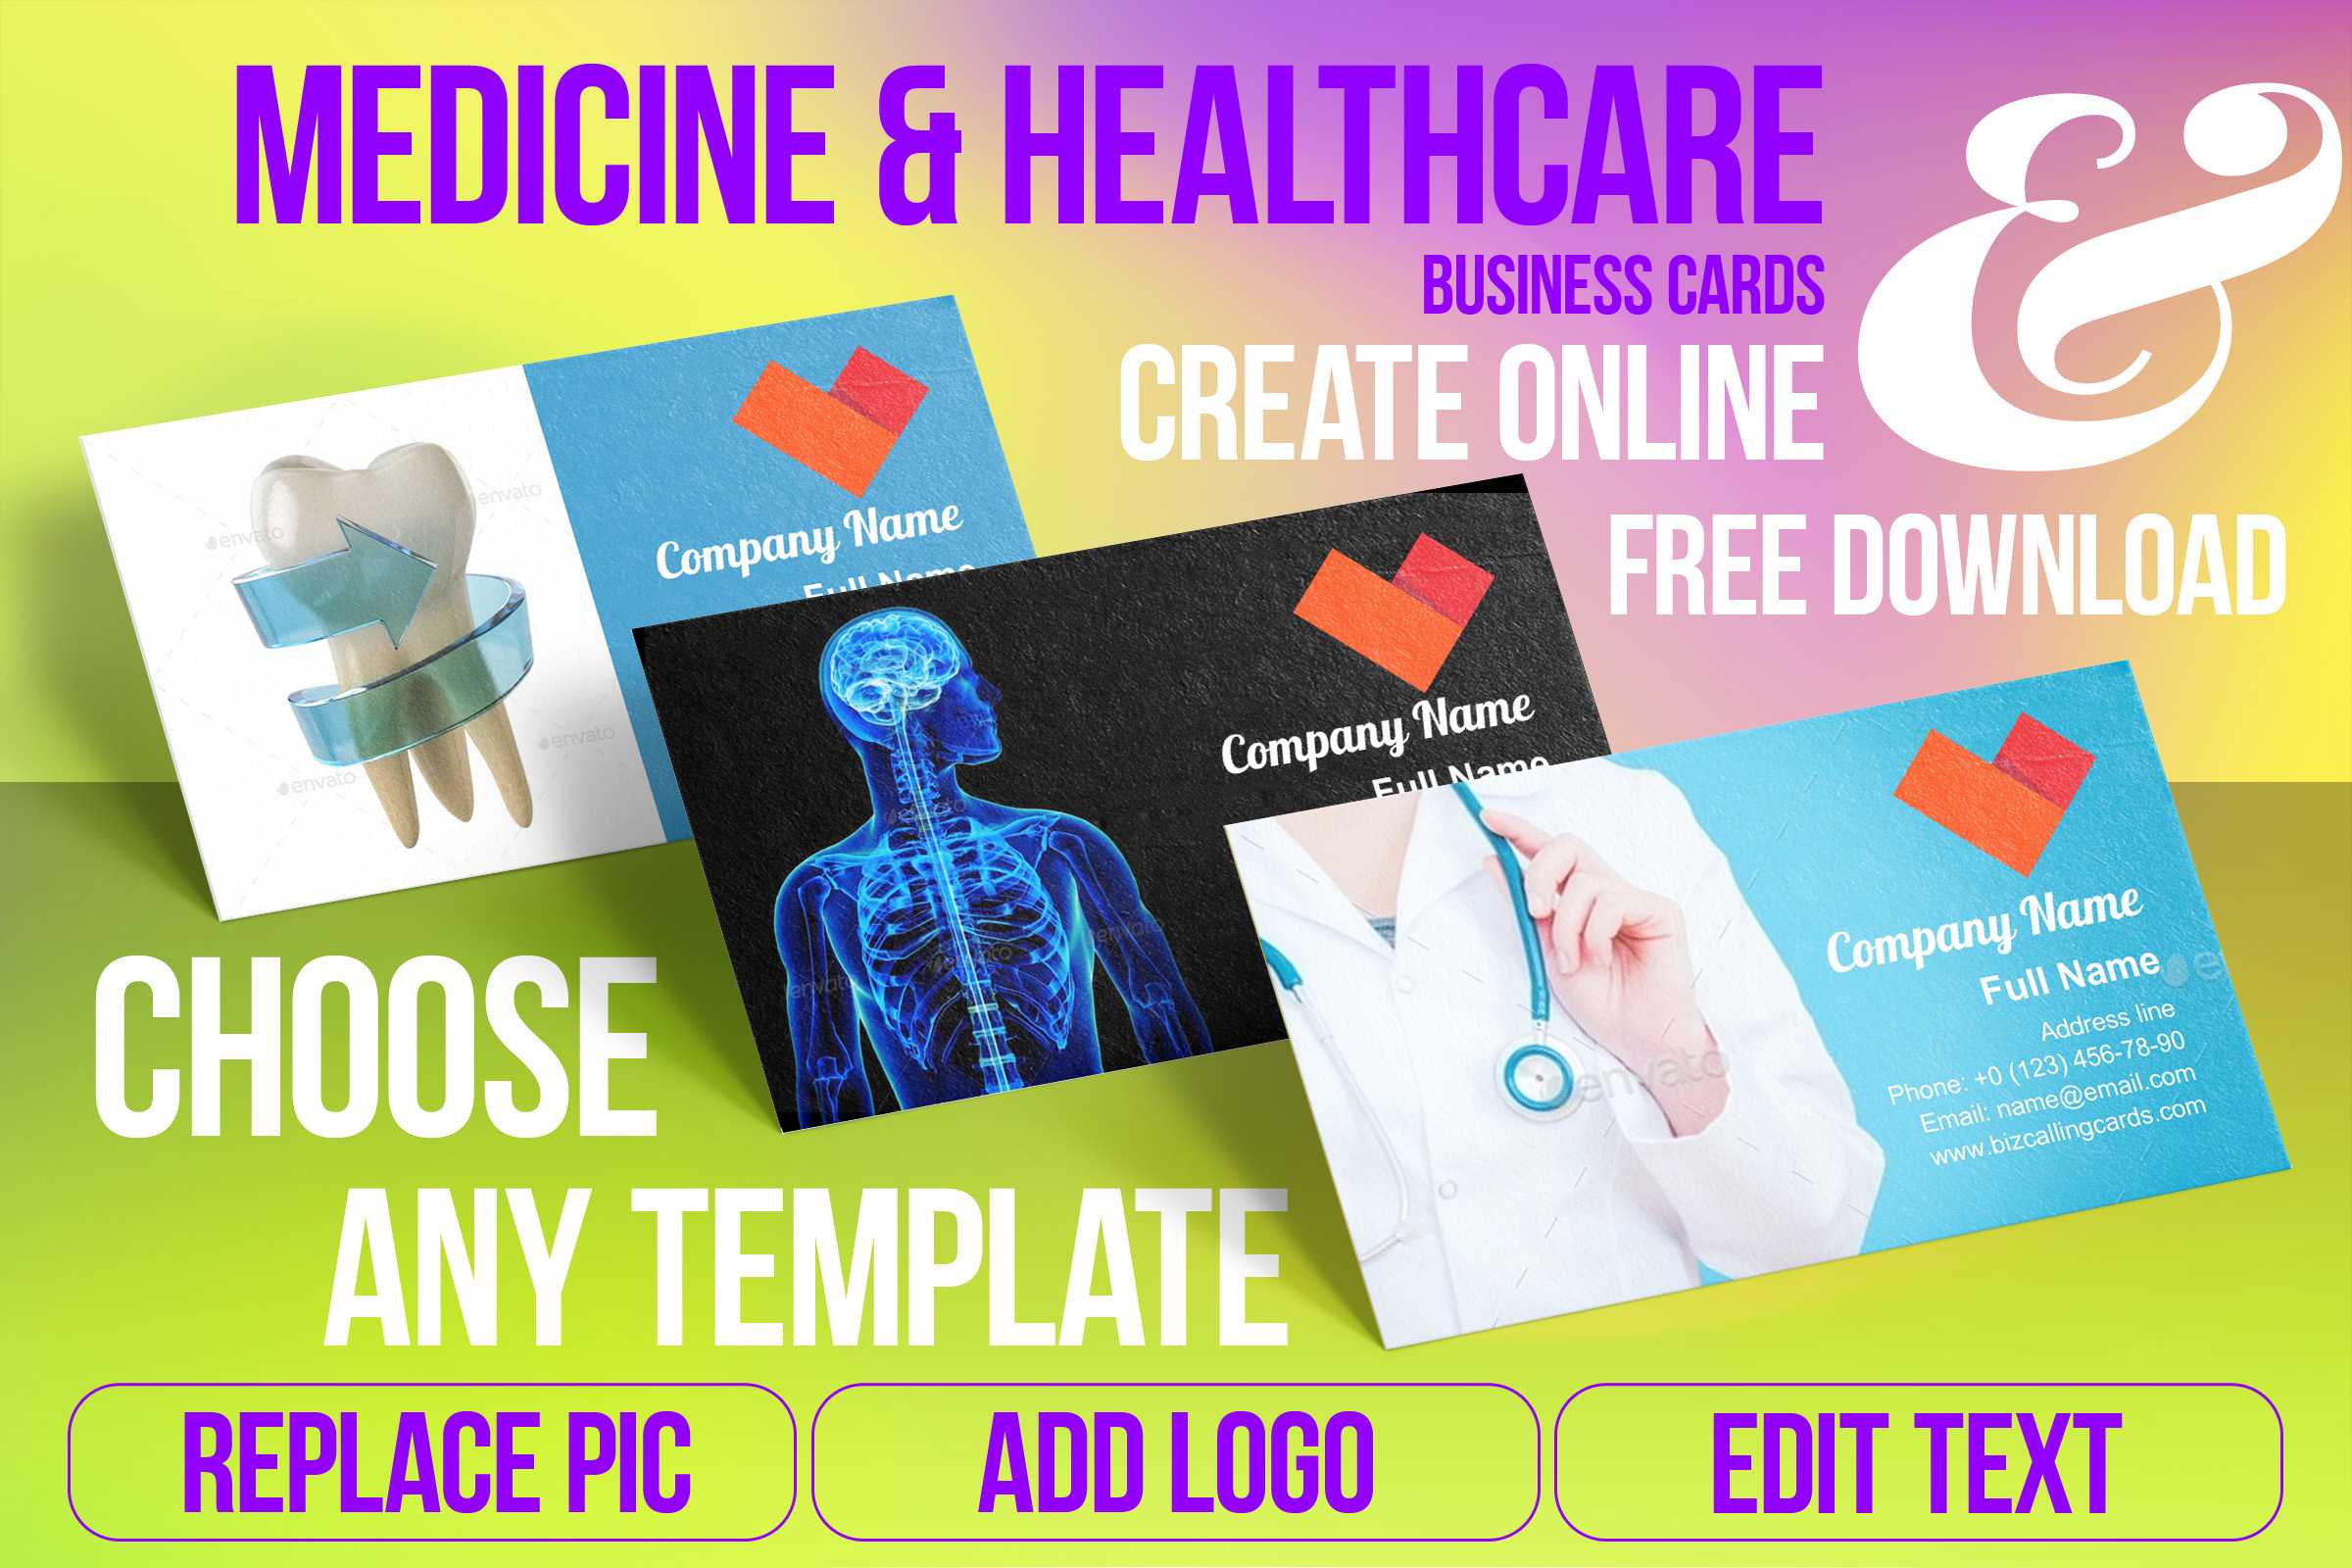 Medicine & Healthcare Business Card Samples For Create For Medical Business Cards Templates Free